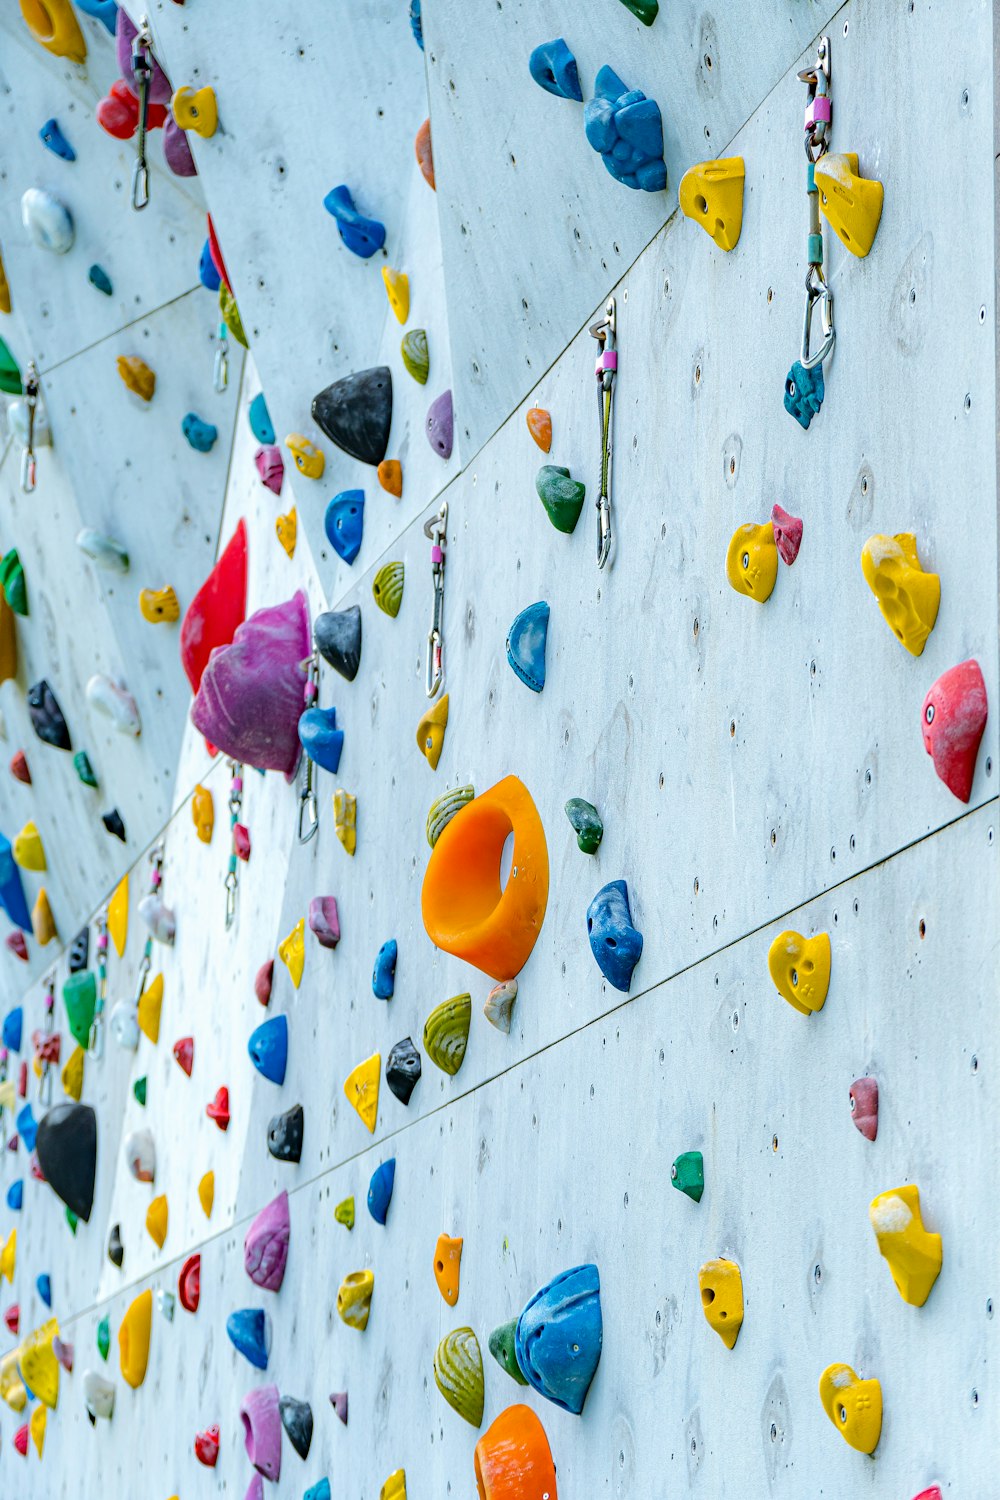 a climbing wall with colorful climbing gear